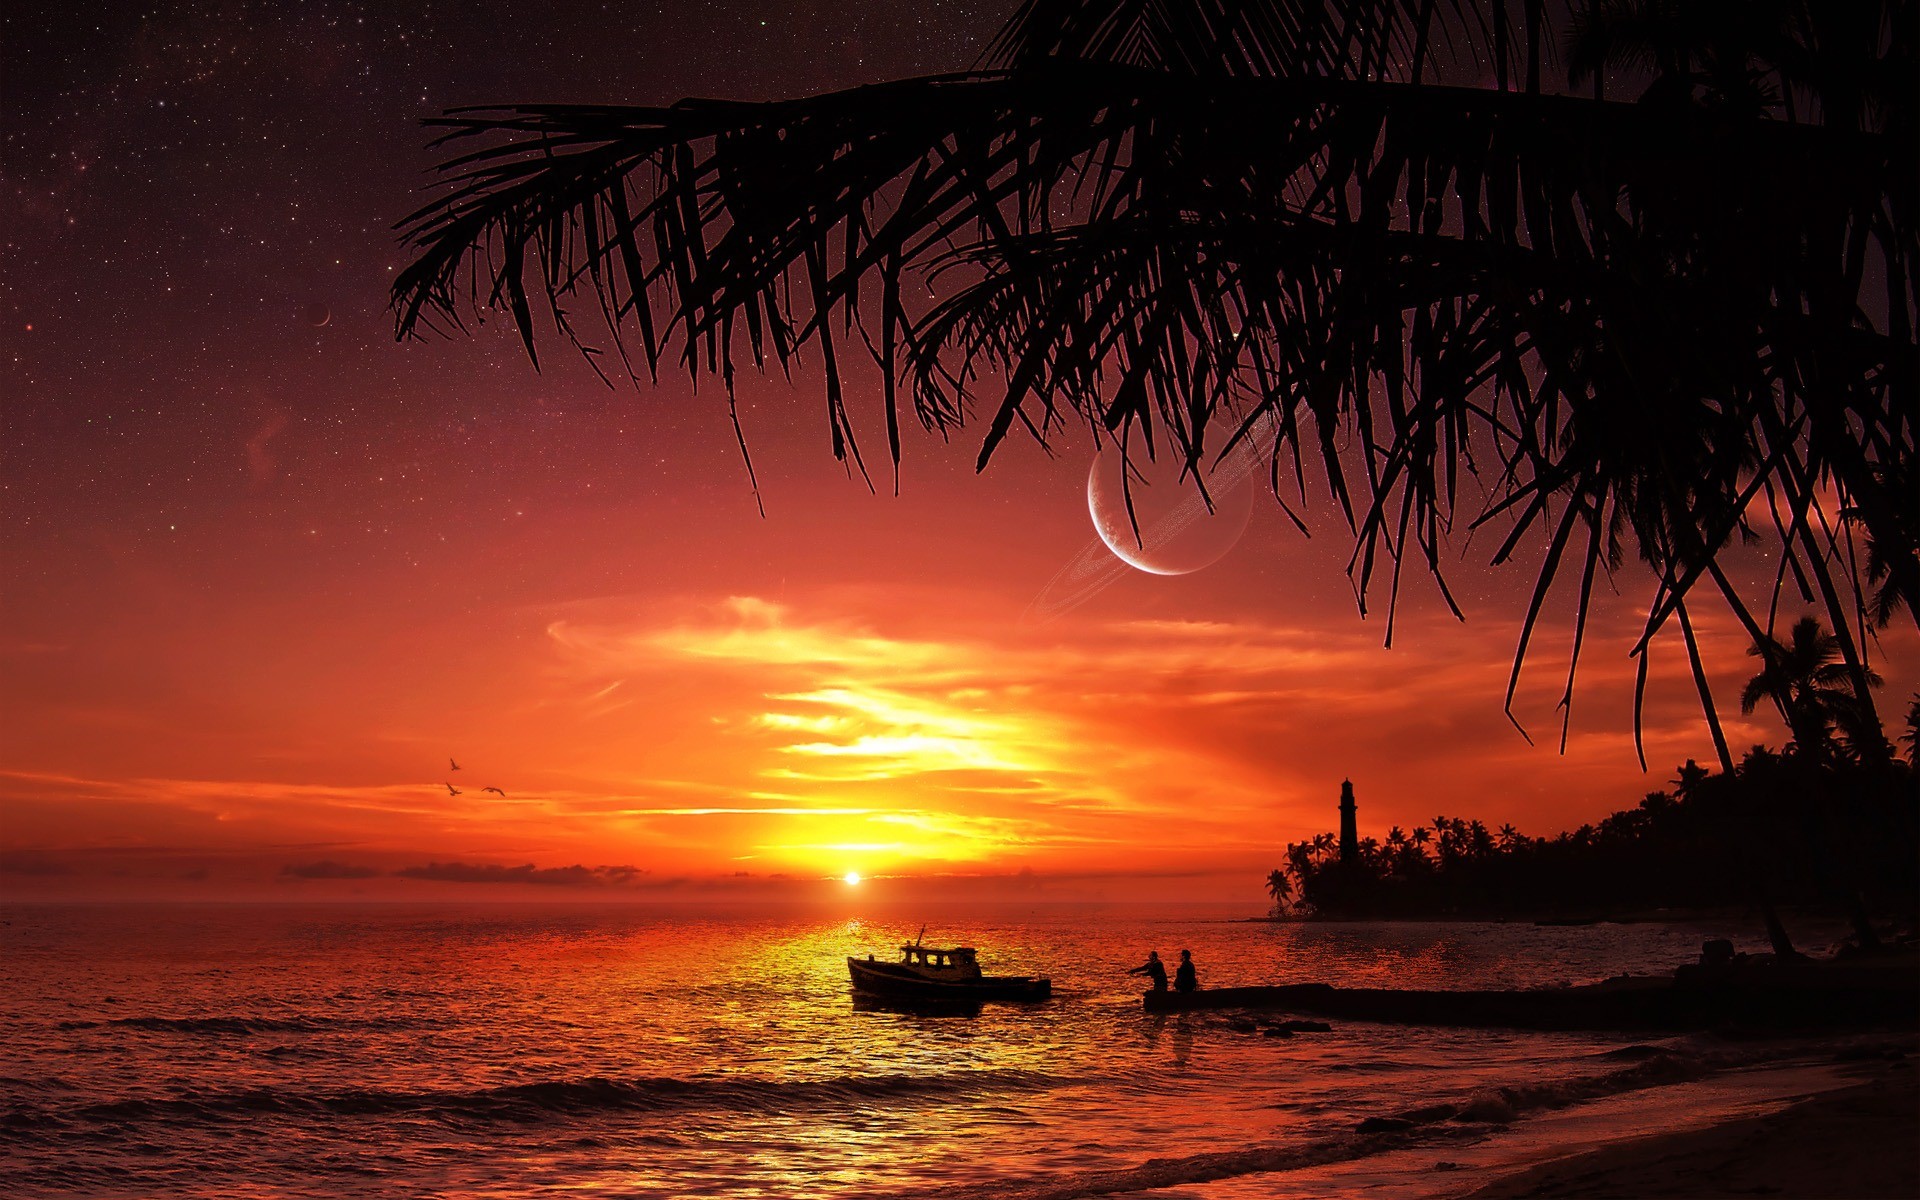 dream, Sunset, Ocean, Sea, Sky, Clouds, Planets, Sci fi, Lighthouse, Boats, People Wallpaper